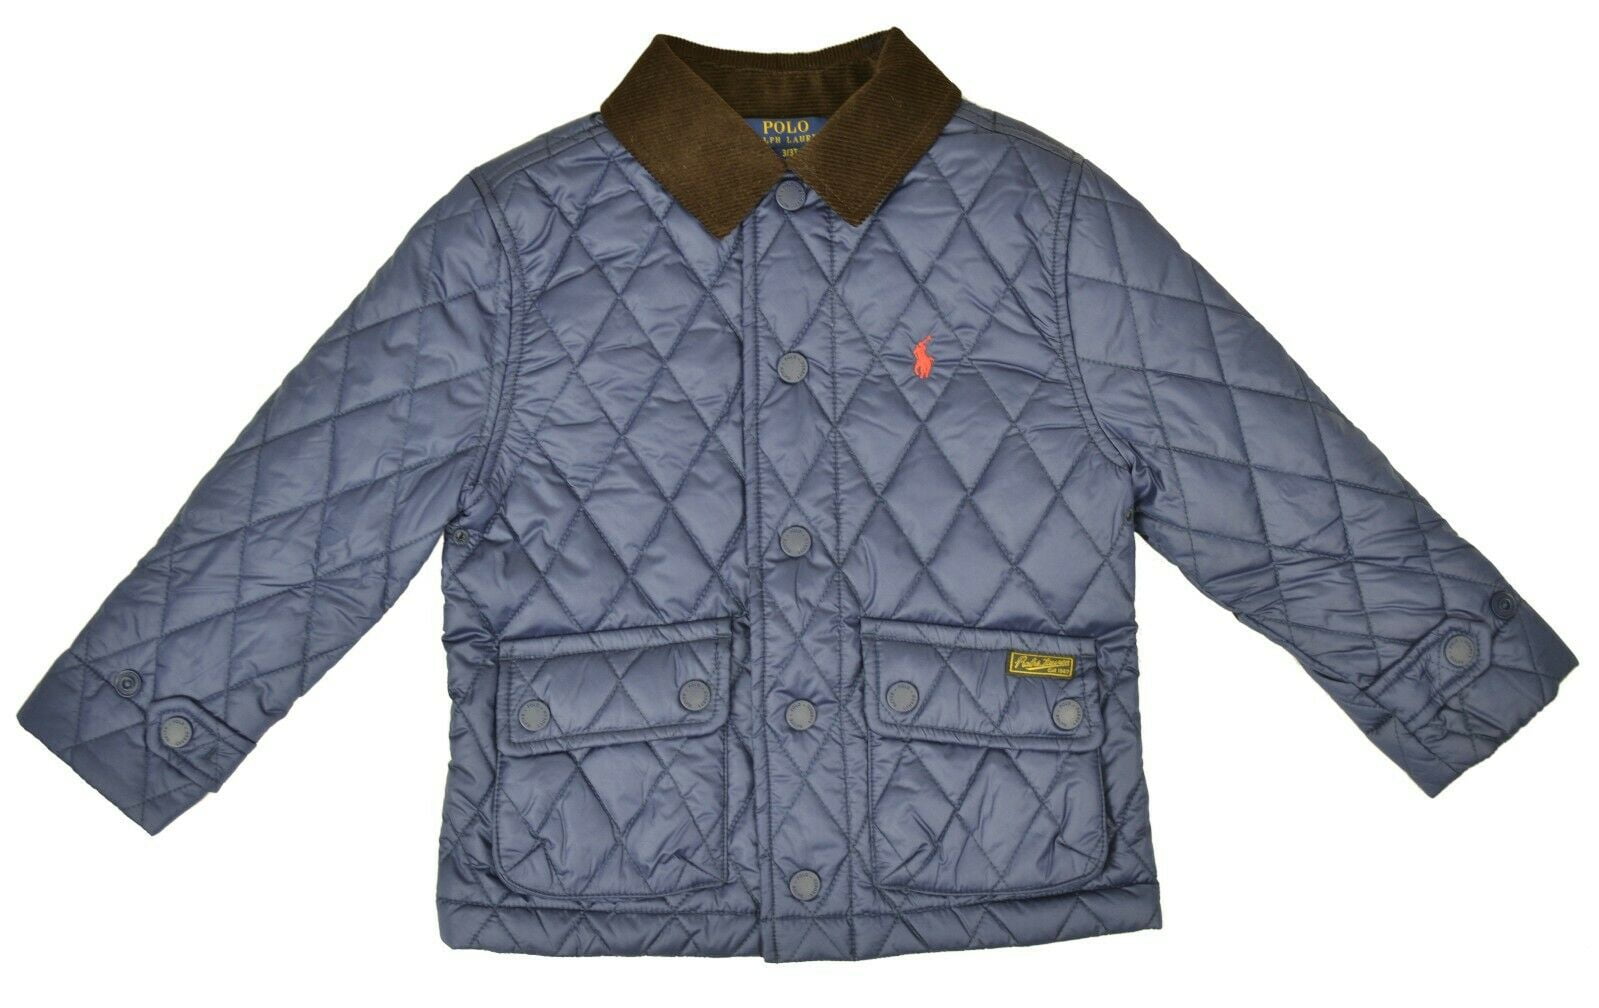 New Polo Ralph Lauren Kids Boys Water-Resistant Quilted Jacket, Navy, Size  7, 9744-1 